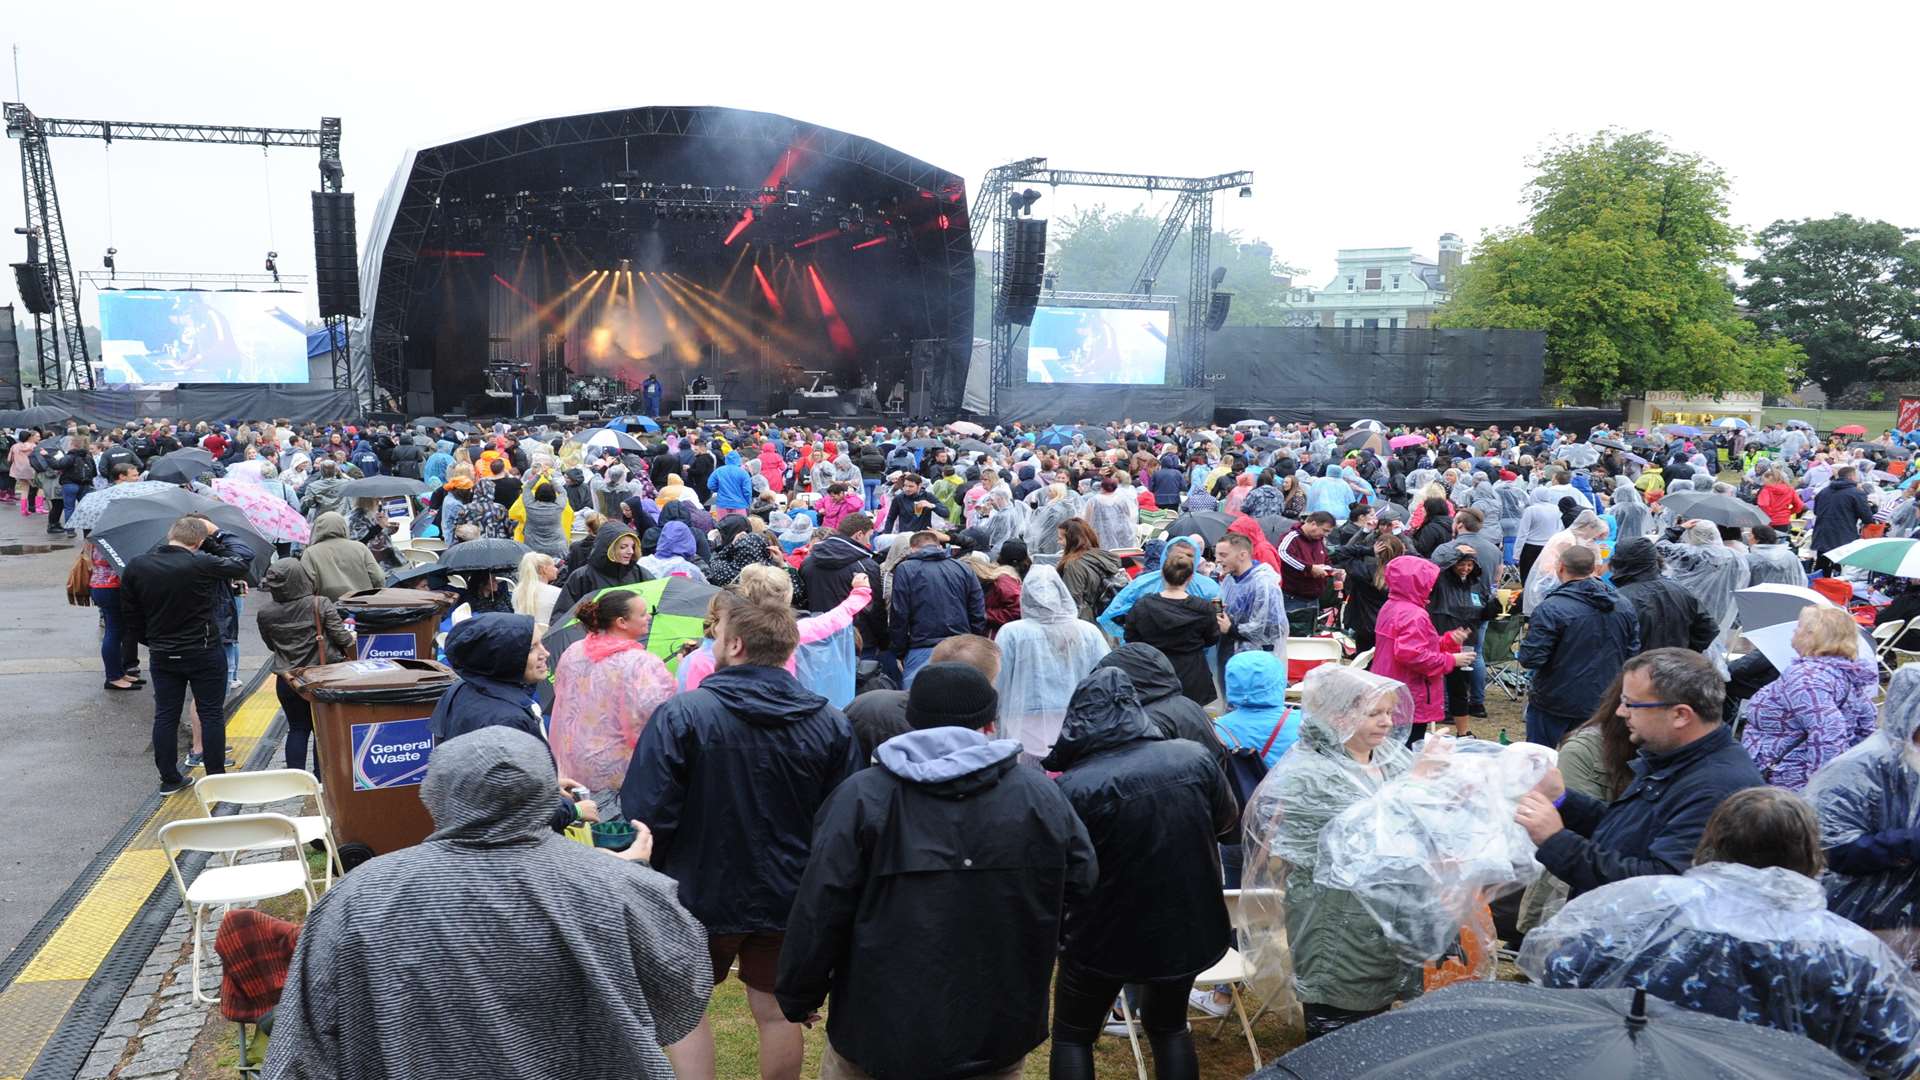 Despite the rain, concert goers held out to see Craig David perform.